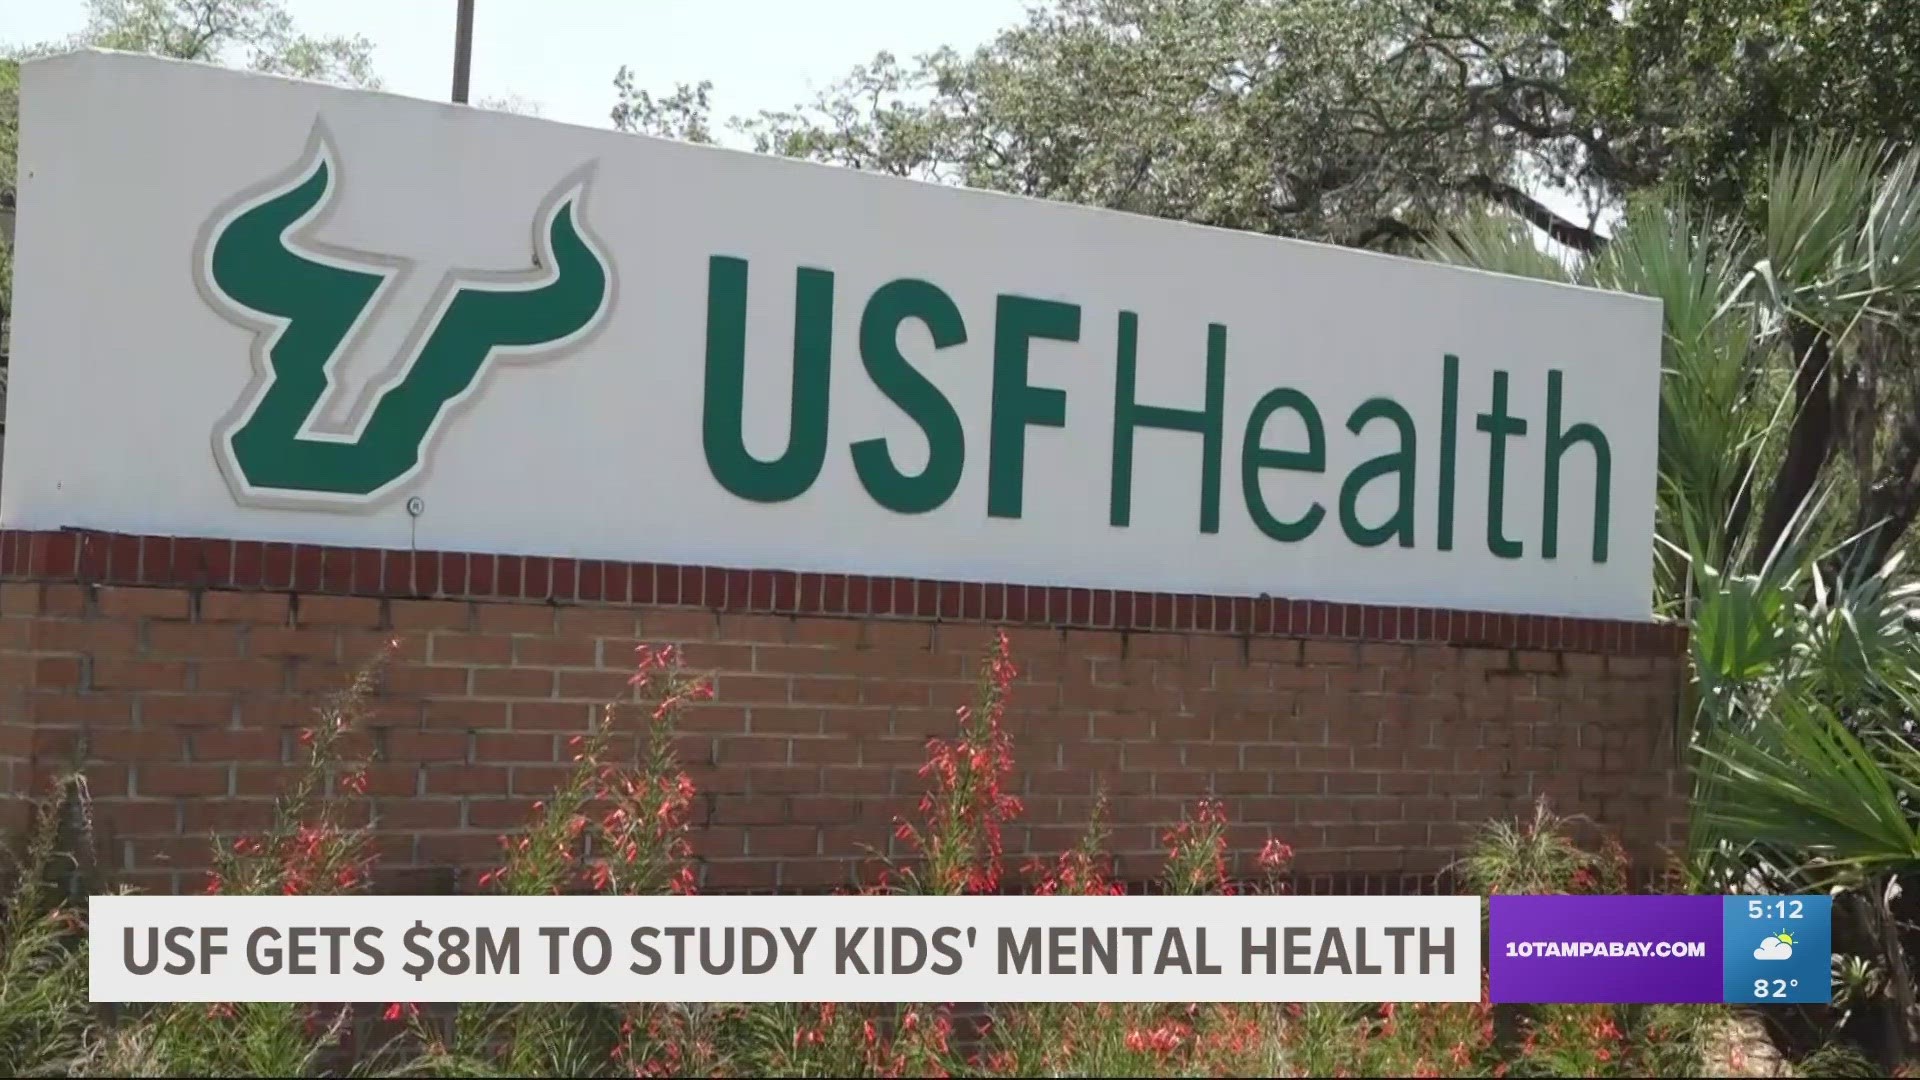 The USF program also aims to help schools adopt a framework for mental health assessments.